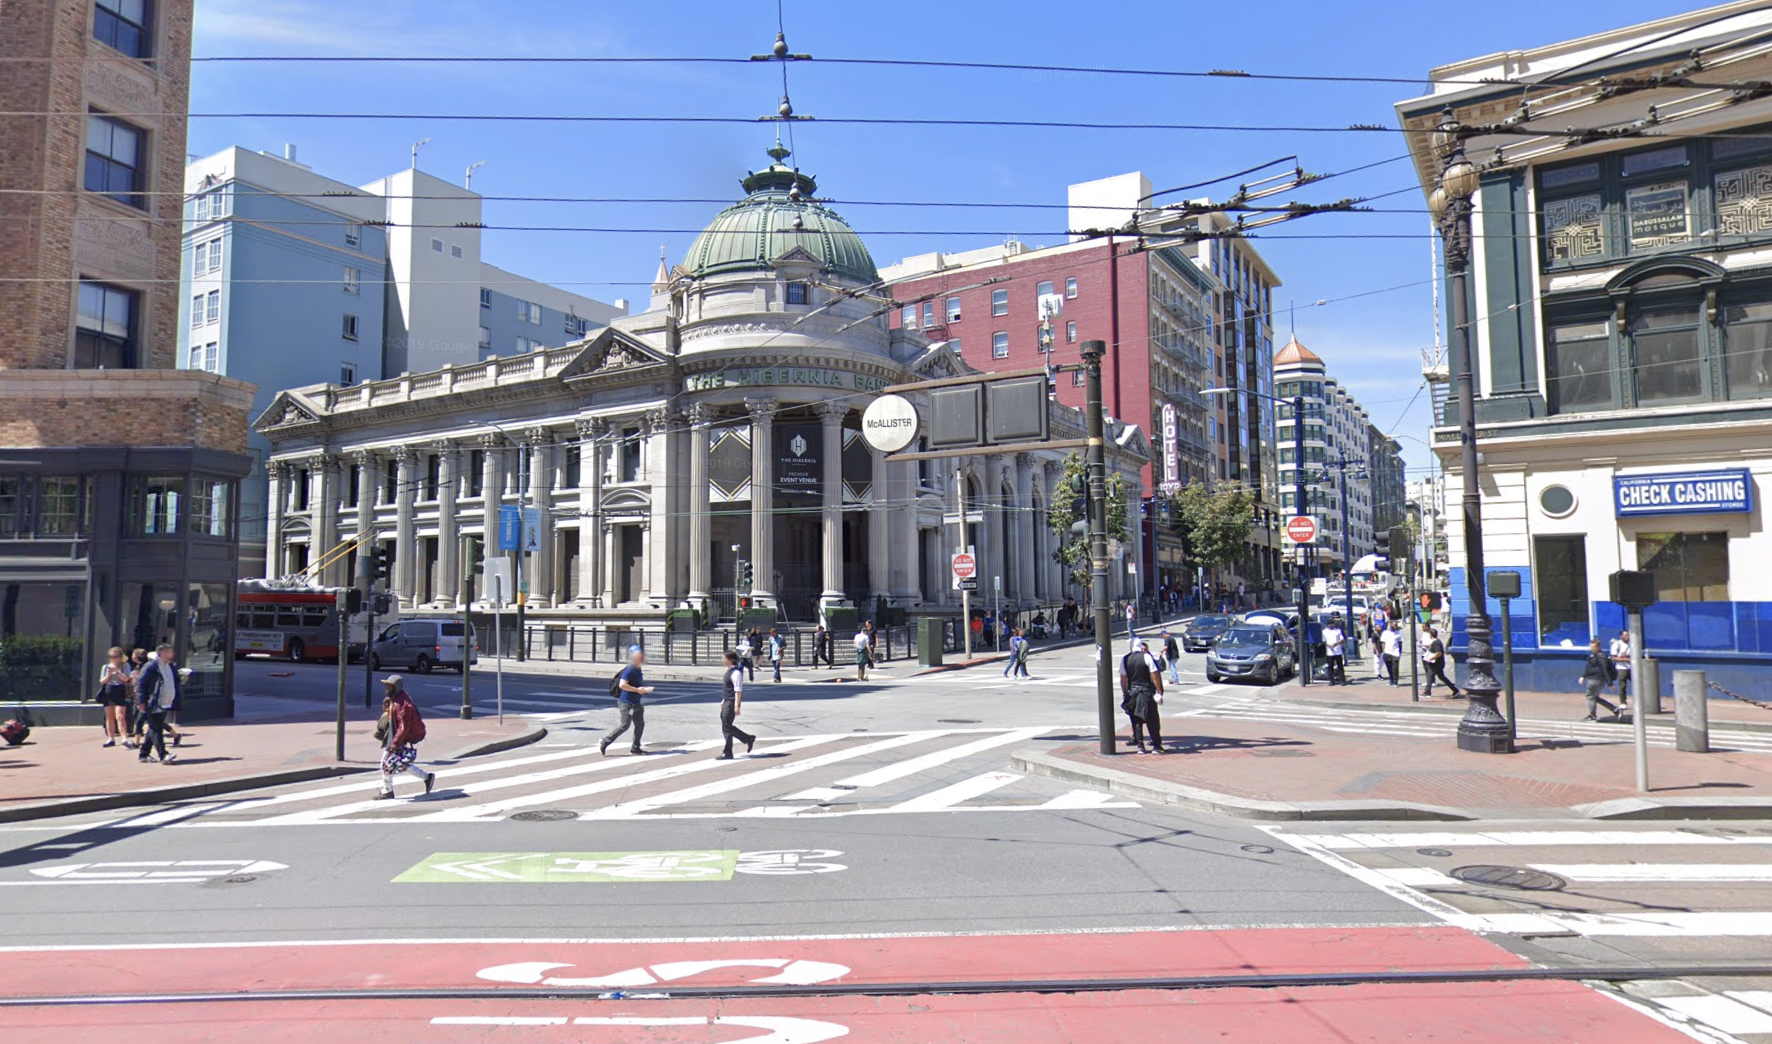 A city intersection is shown in a photo.